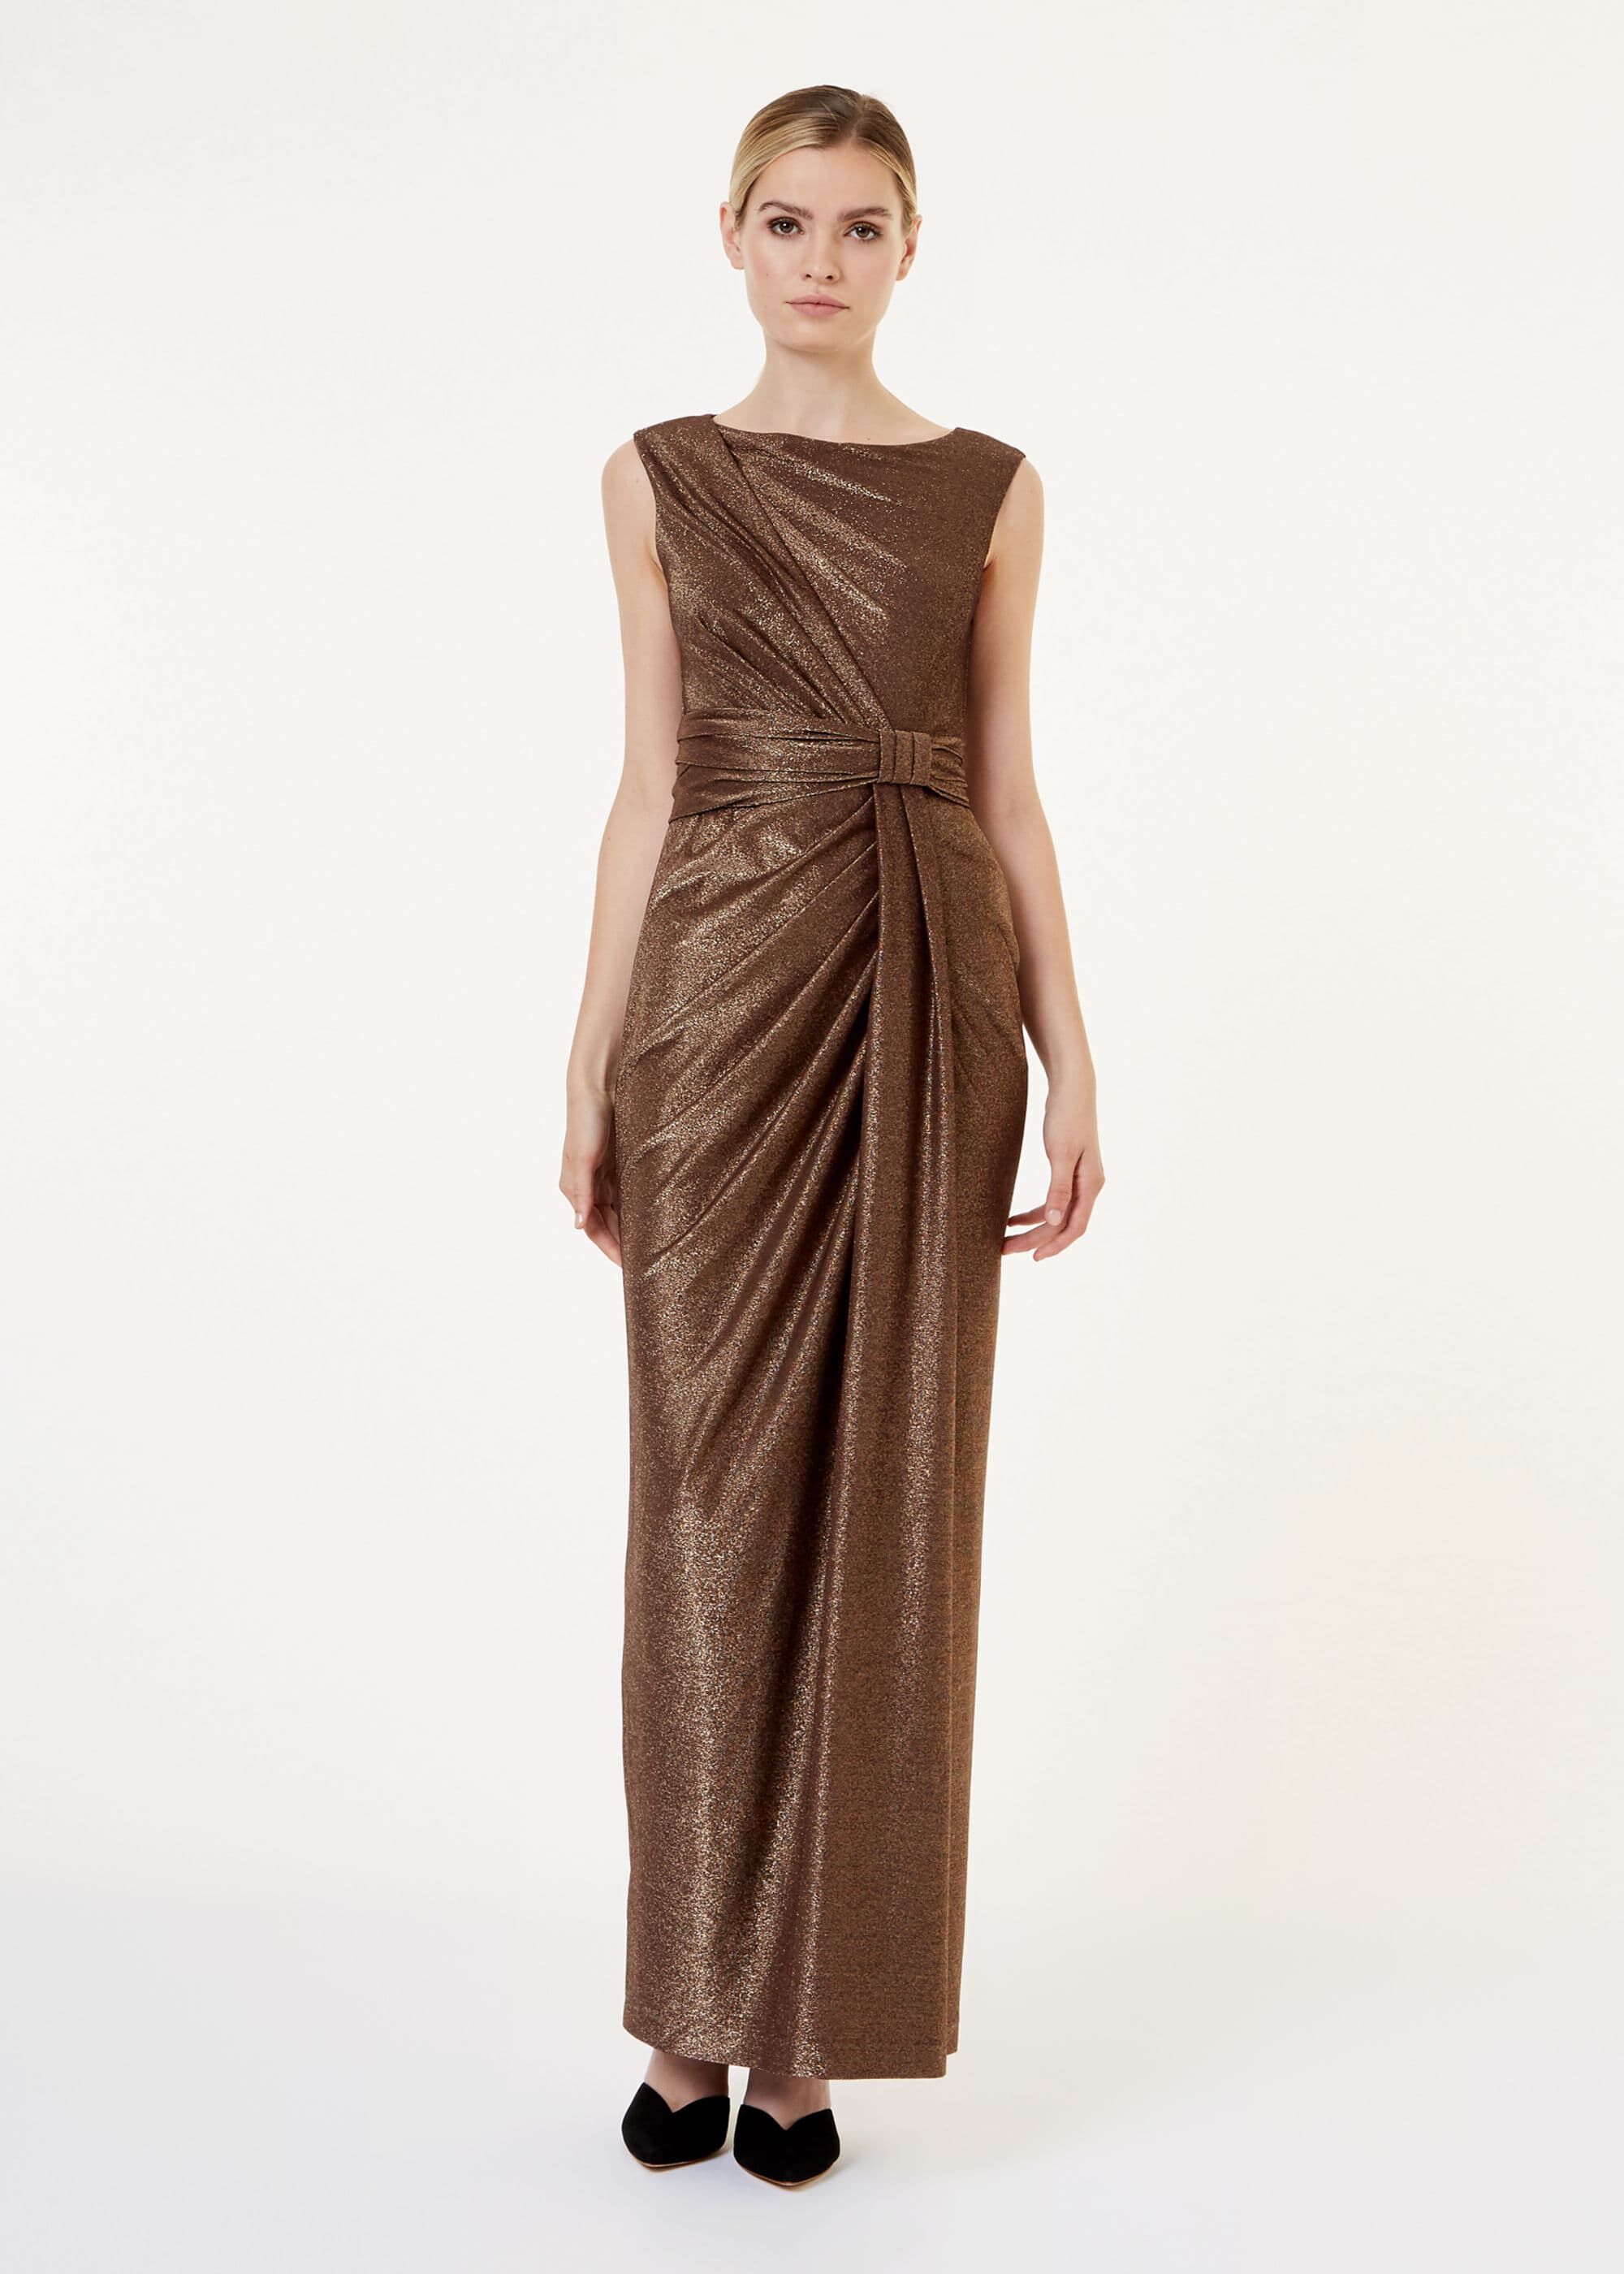 gold a line gown